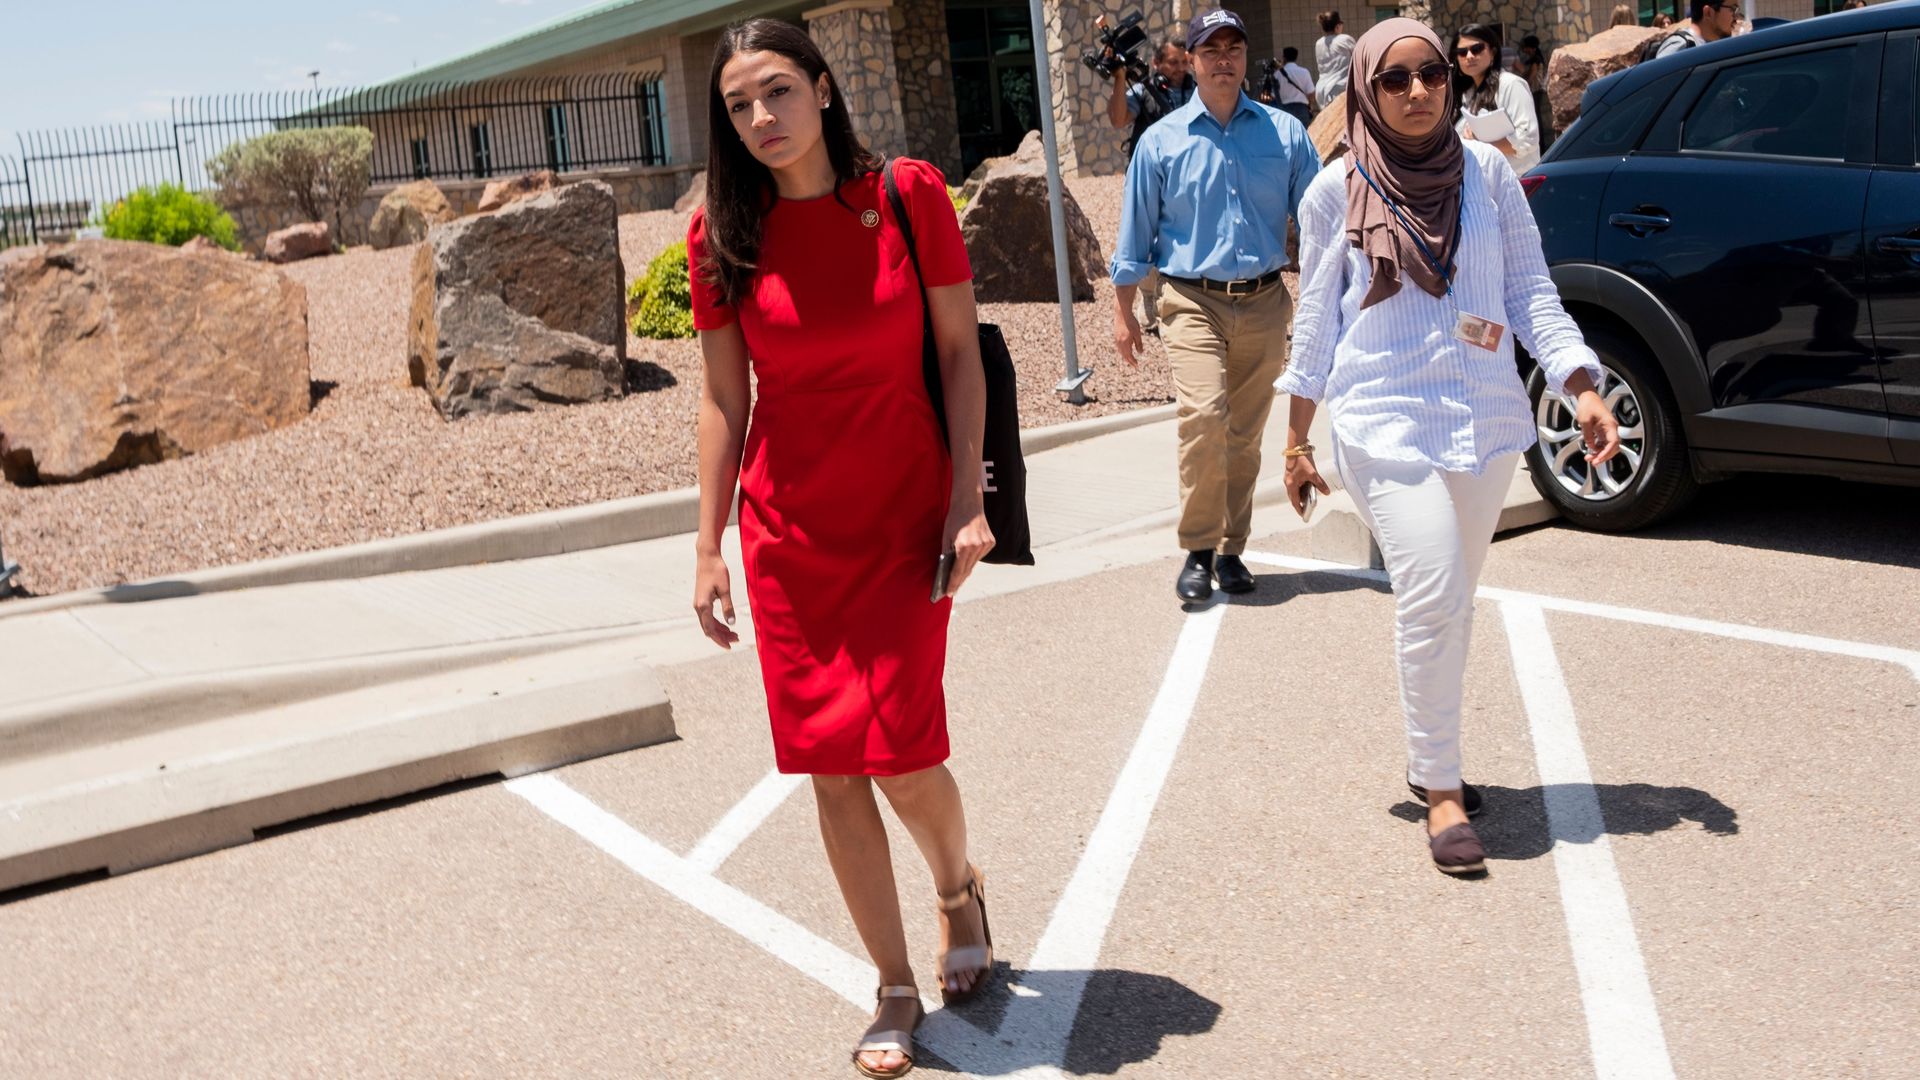 US Representative Alexandria Ocasio-Cortez (D-NY) attends with 14 members of the Congressional Hispanic Caucus a tour to Border Patrol facilities and migrant detention centers on July 1.